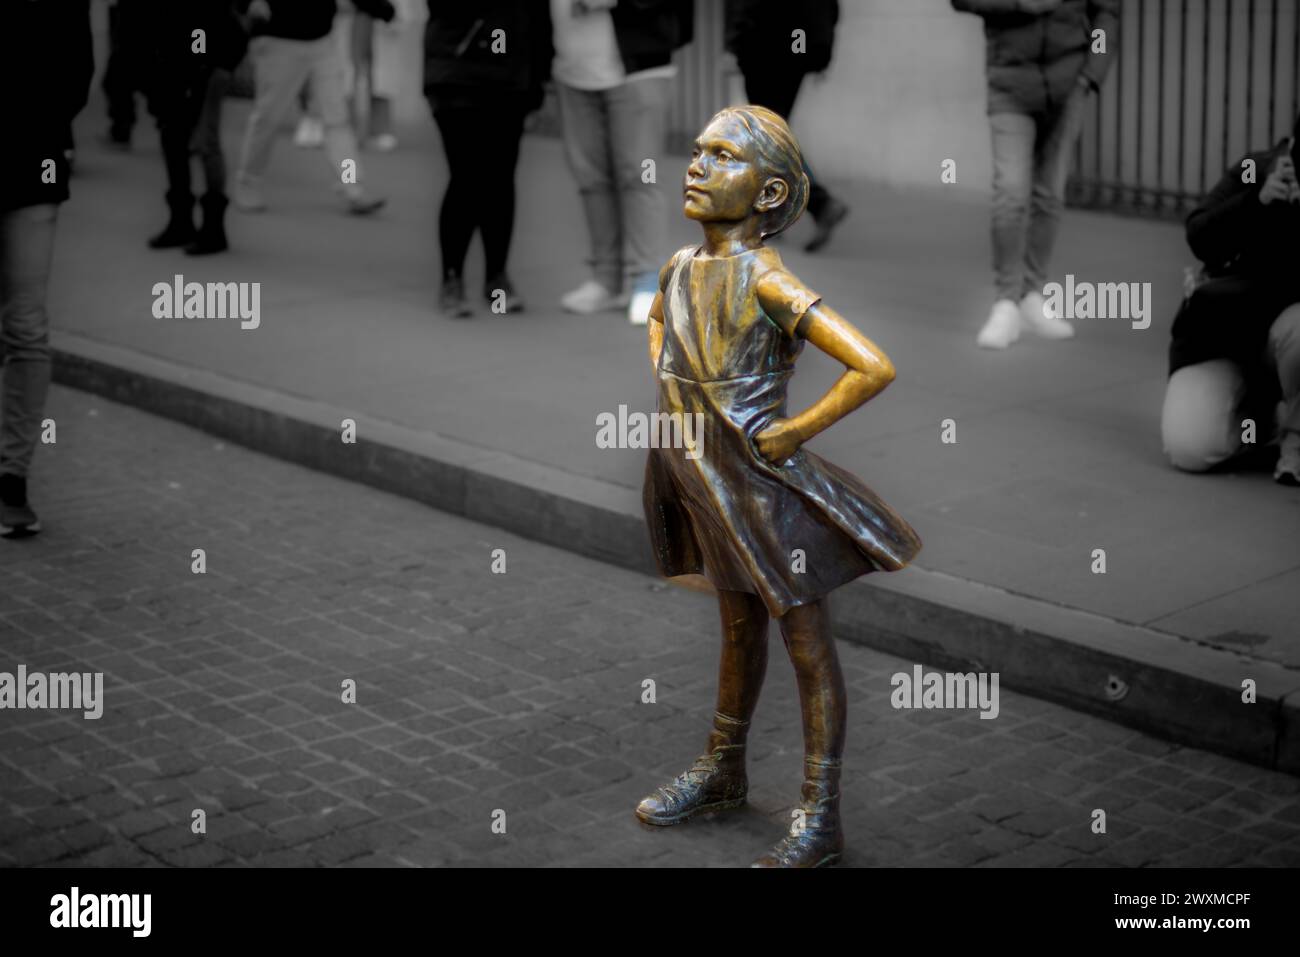 Statue of a girl in the city, placed on a sidewalk near a street Stock Photo